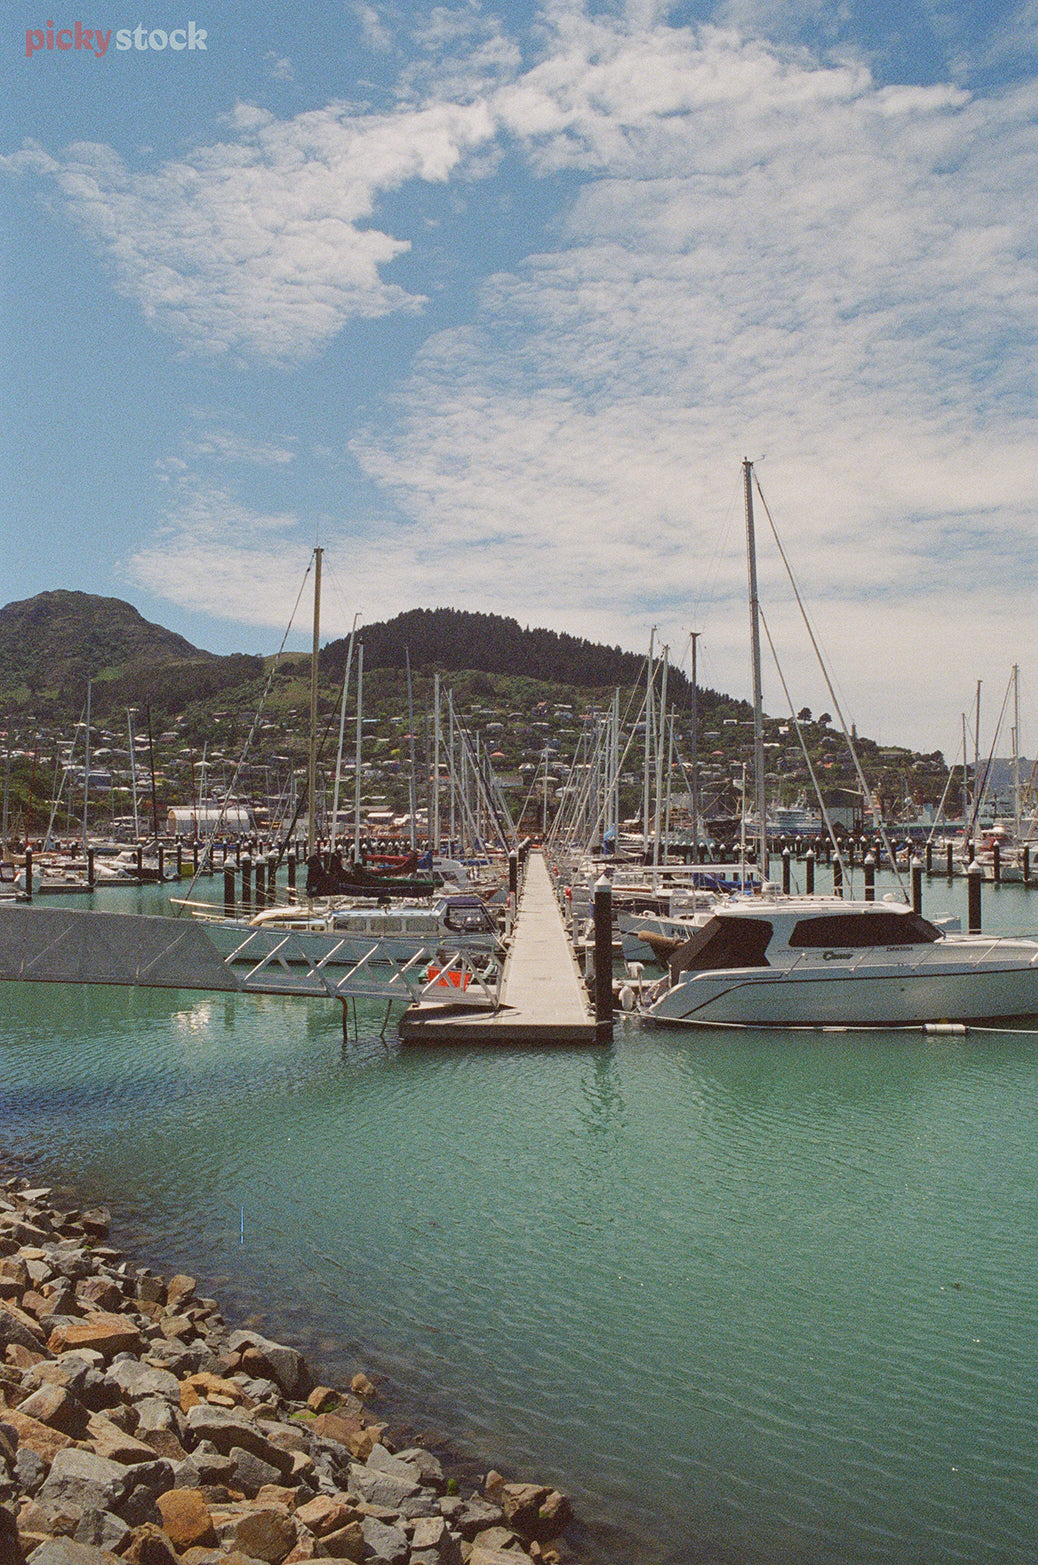 Looking down a marina jetty, lined with sail boats and launches on a bright blue day. 